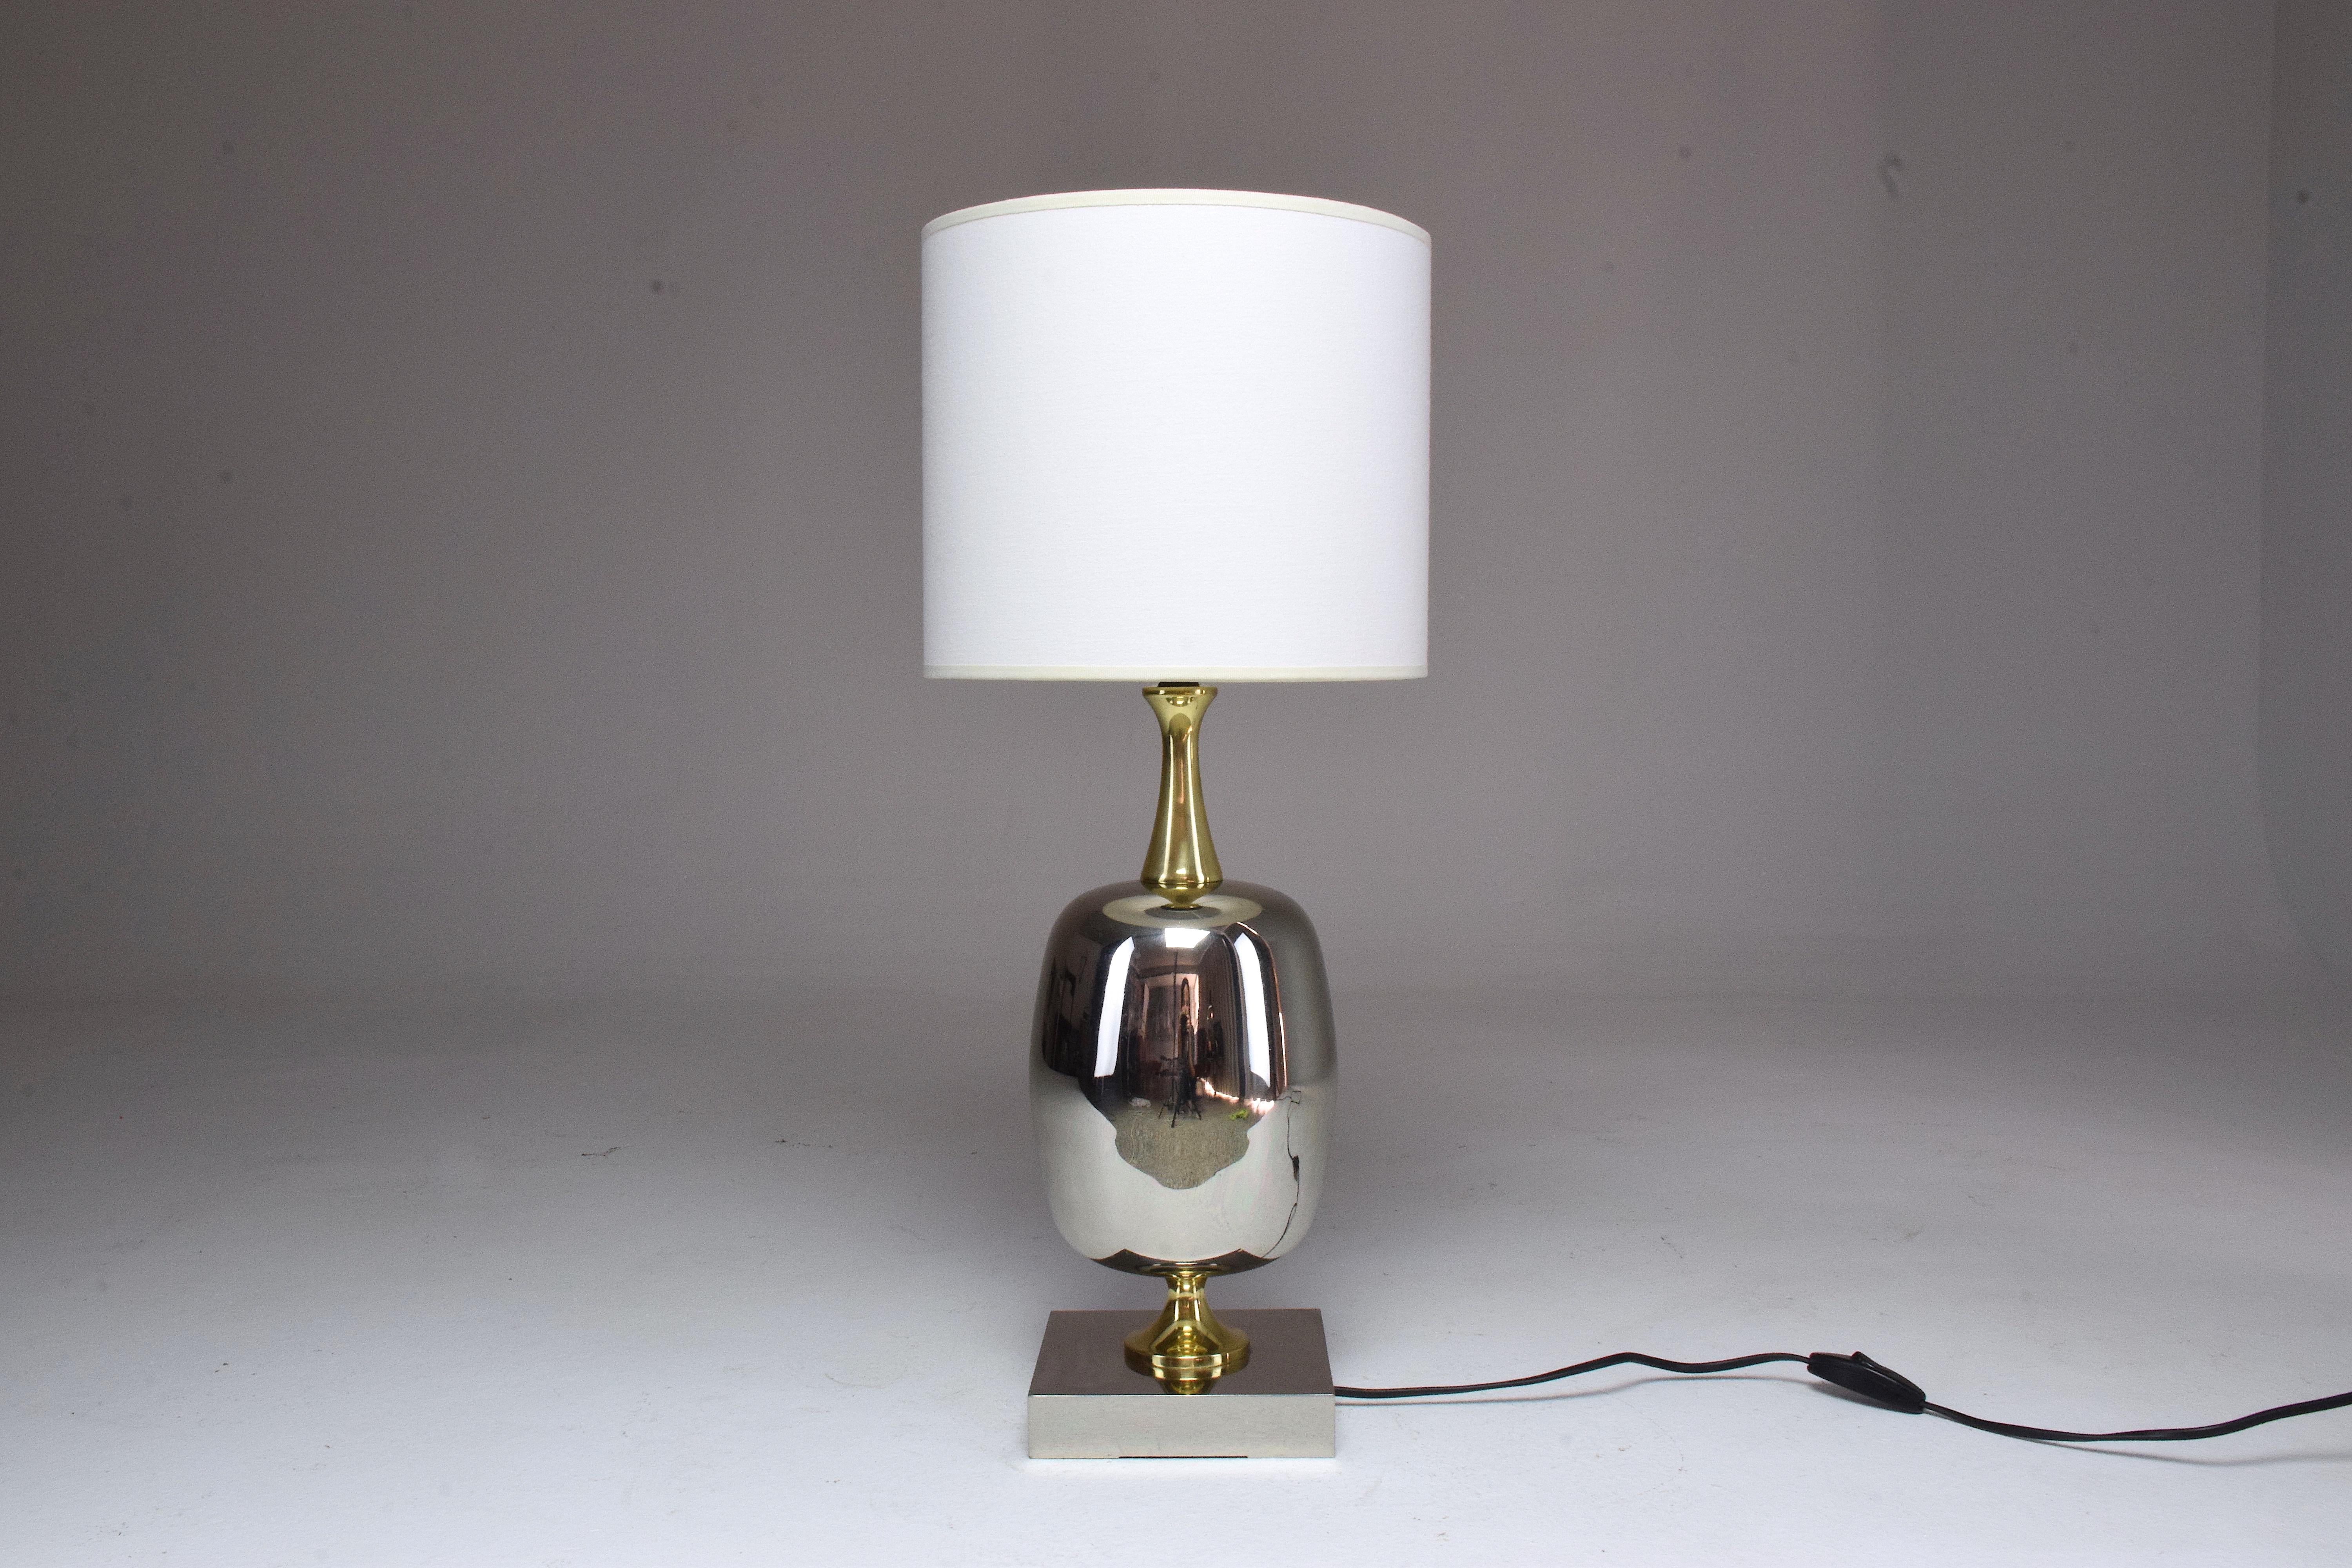 A 20th-century French vintage table statement lamp fully restored in nickel-plated brass, gold polished brass details, and new cylinder fabric shade. The main part of the lamp was originally brass plated which we stripped of to reveal the silver.